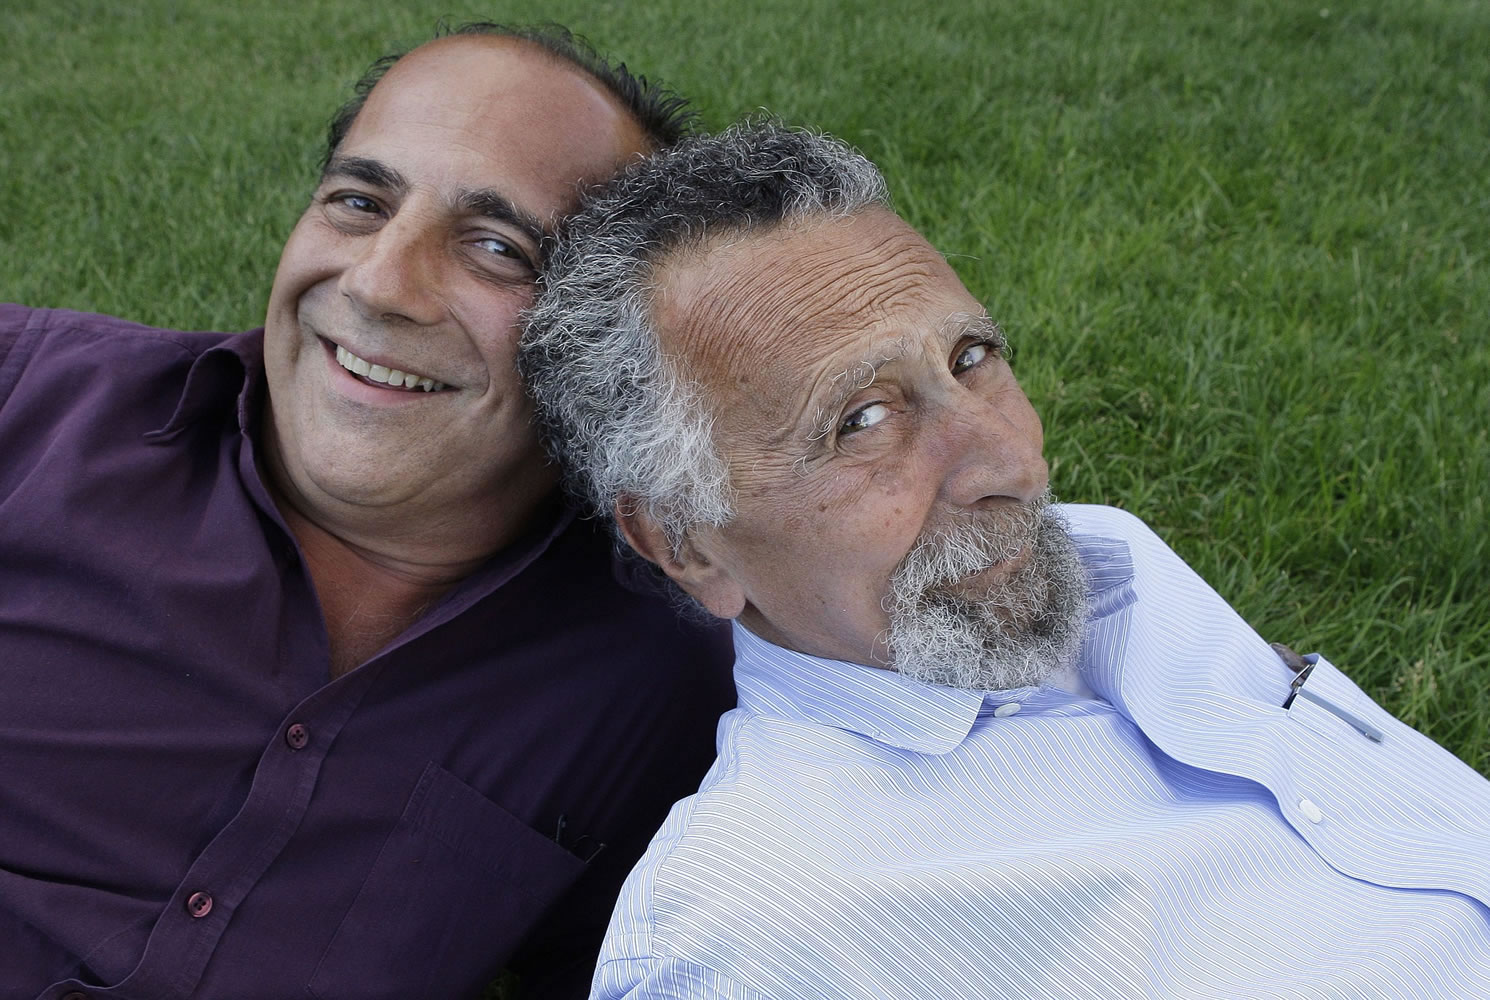 Brothers Ray, left, and Tom Magliozzi, co-hosts of National Public Radio's &quot;Car Talk&quot; show, pose in 2008 in Cambridge, Mass. NPR says Tom Magliozzi died Monday.